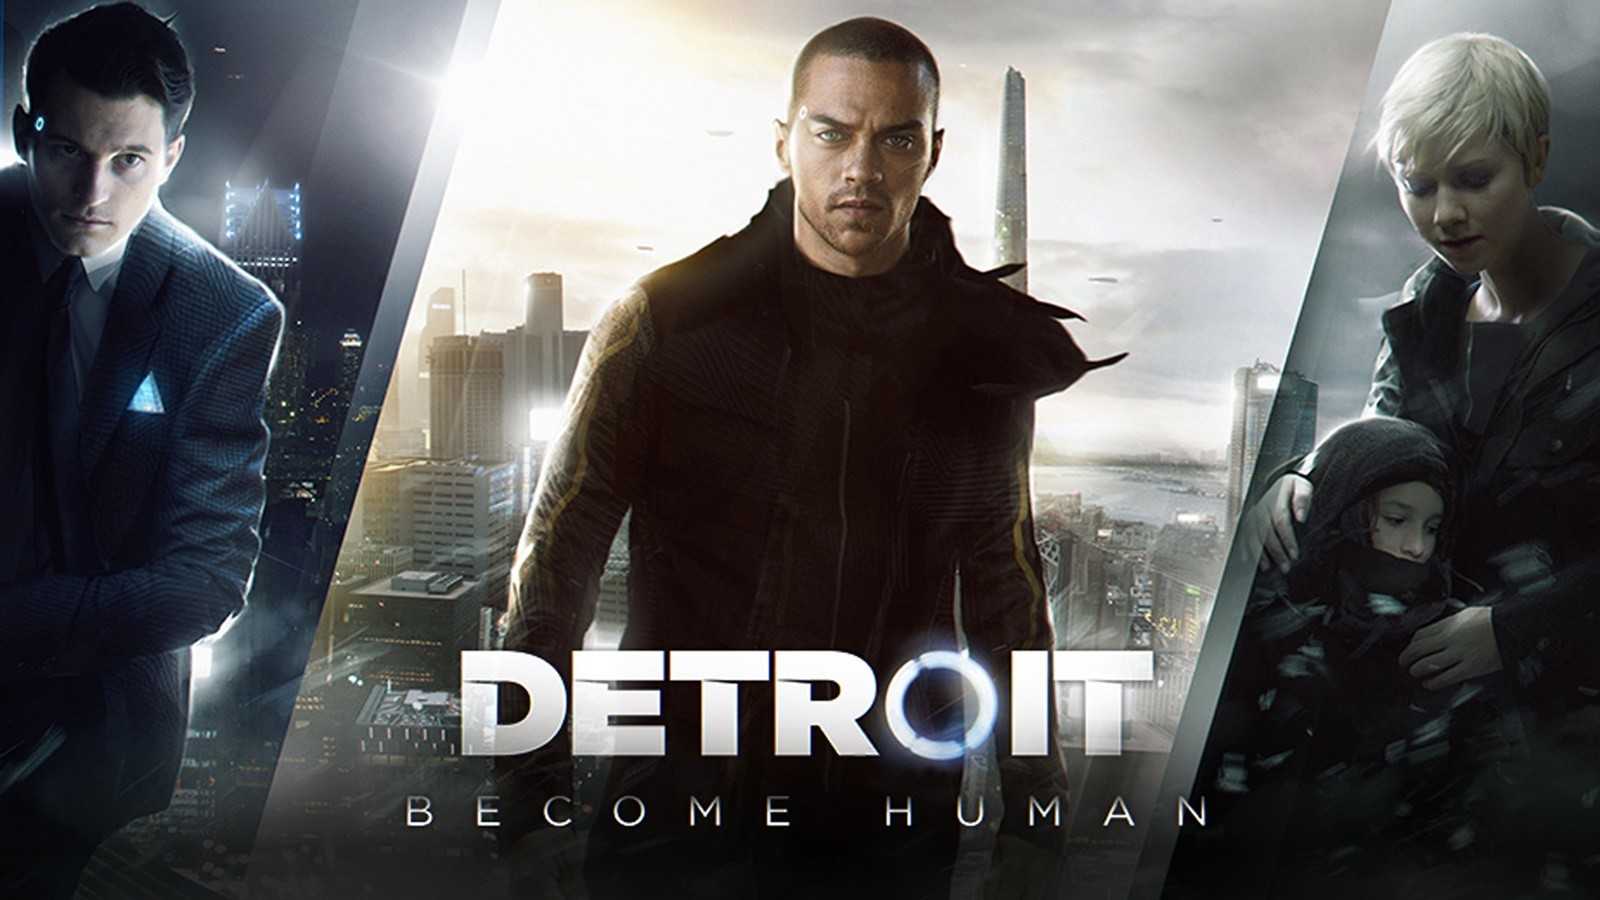 Lance Henriksen, Clancy Brown Appear to Join Detroit: Become Human Cast